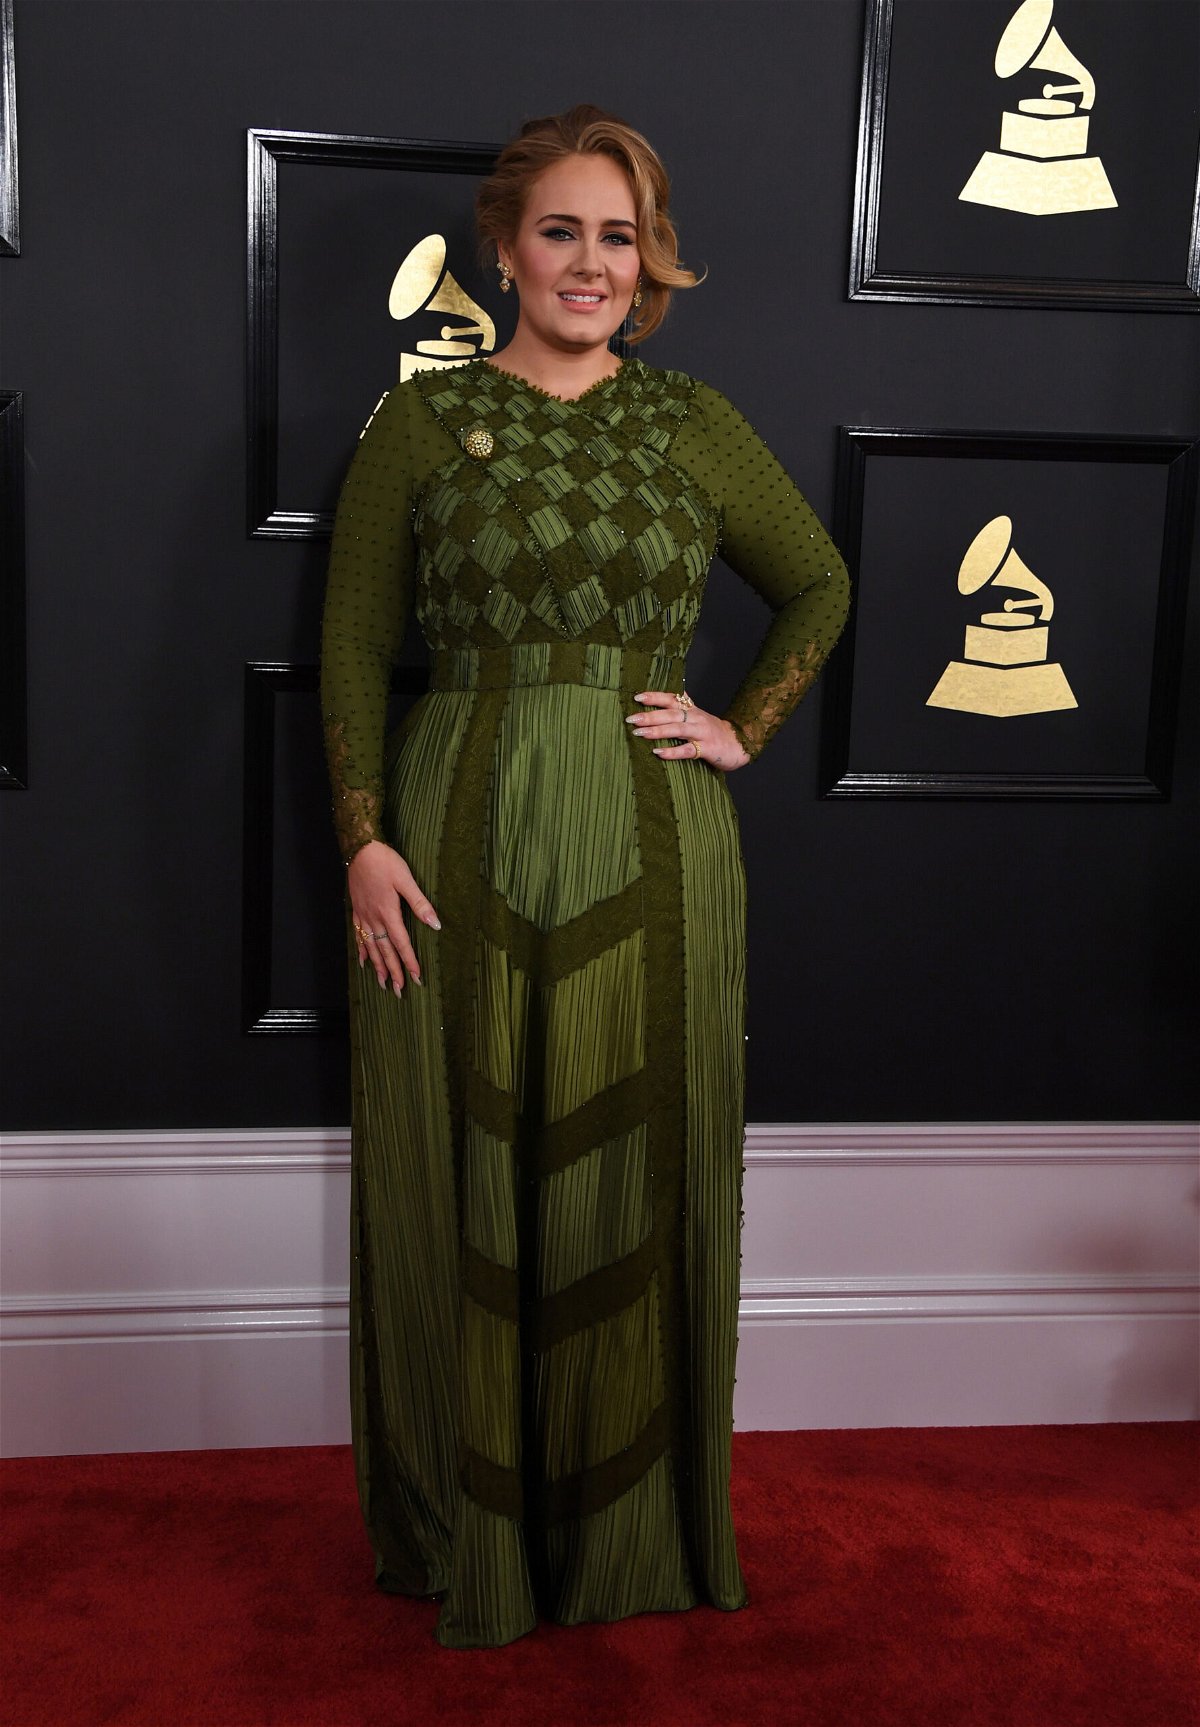 <i>Mark Ralston/AFP/Getty Images</i><br/>Adele has announced a release date for her much anticipated new album. Adele is shown here at the 59th Grammy Awards pre-telecast on February 12